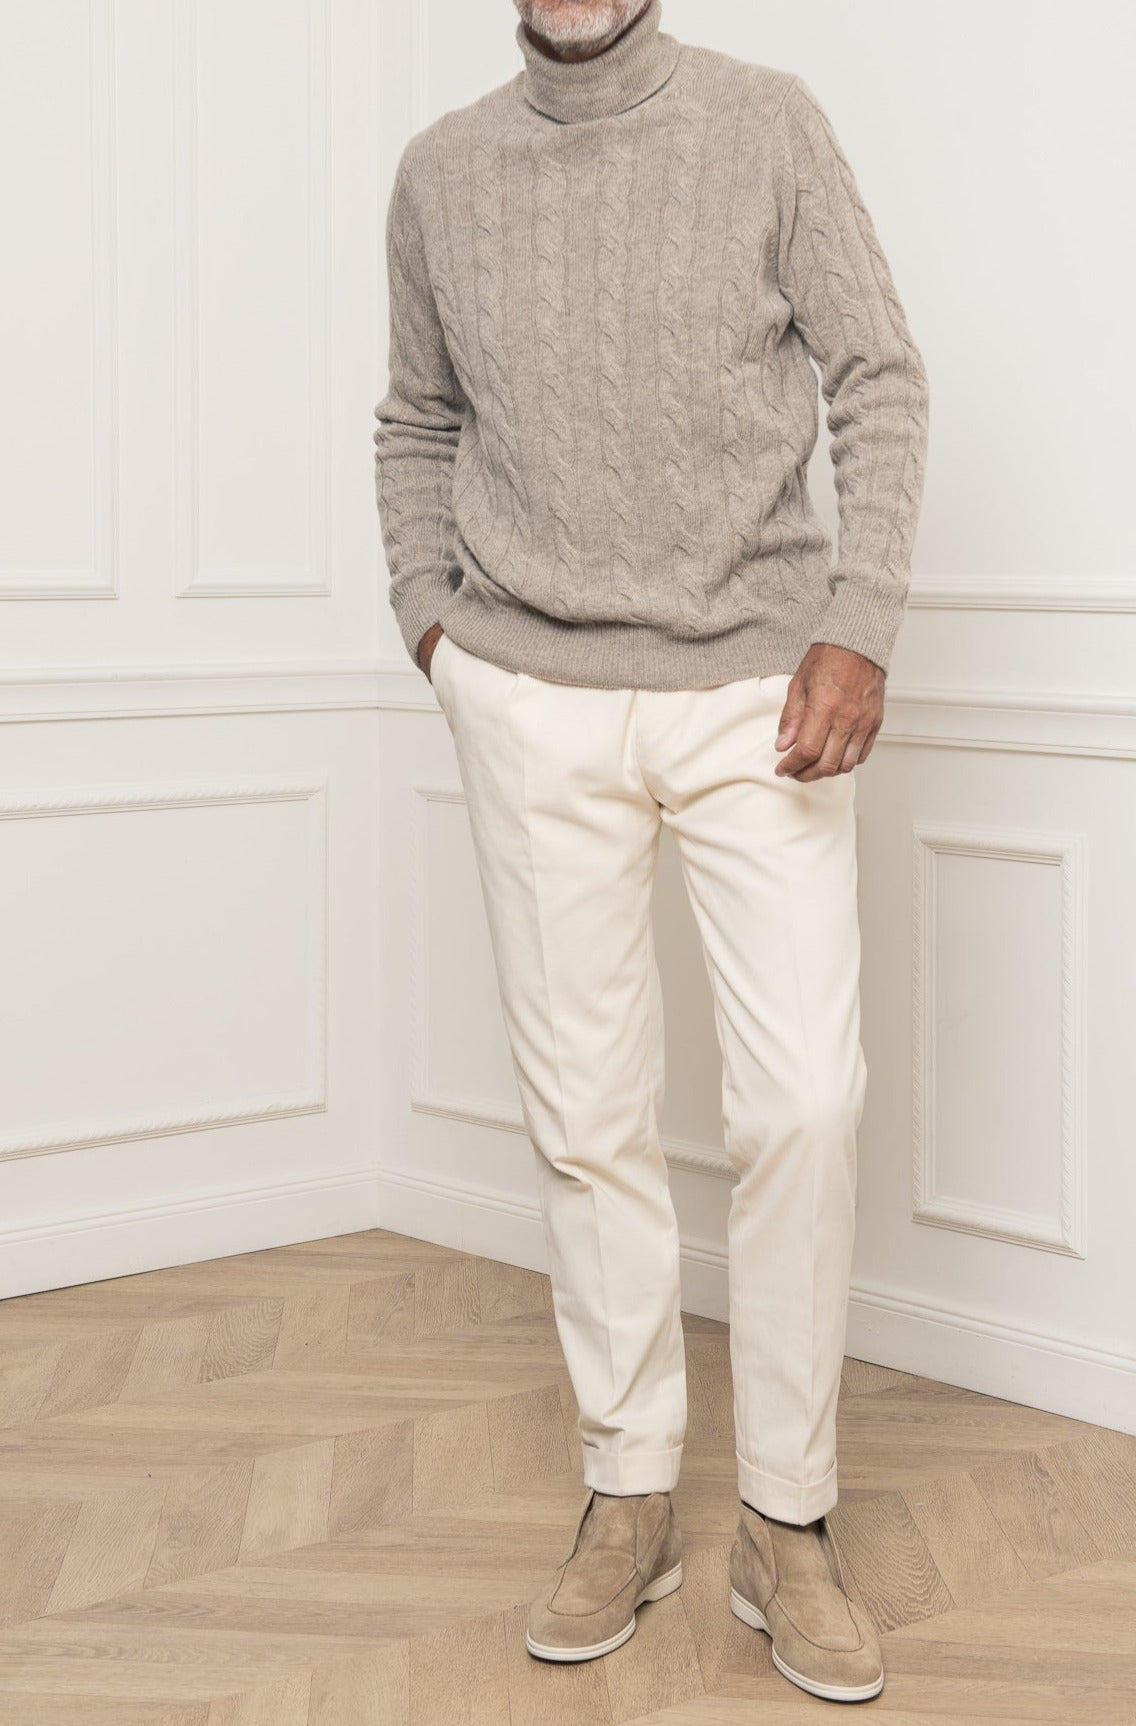 Taupe turtleneck – Made in Italy